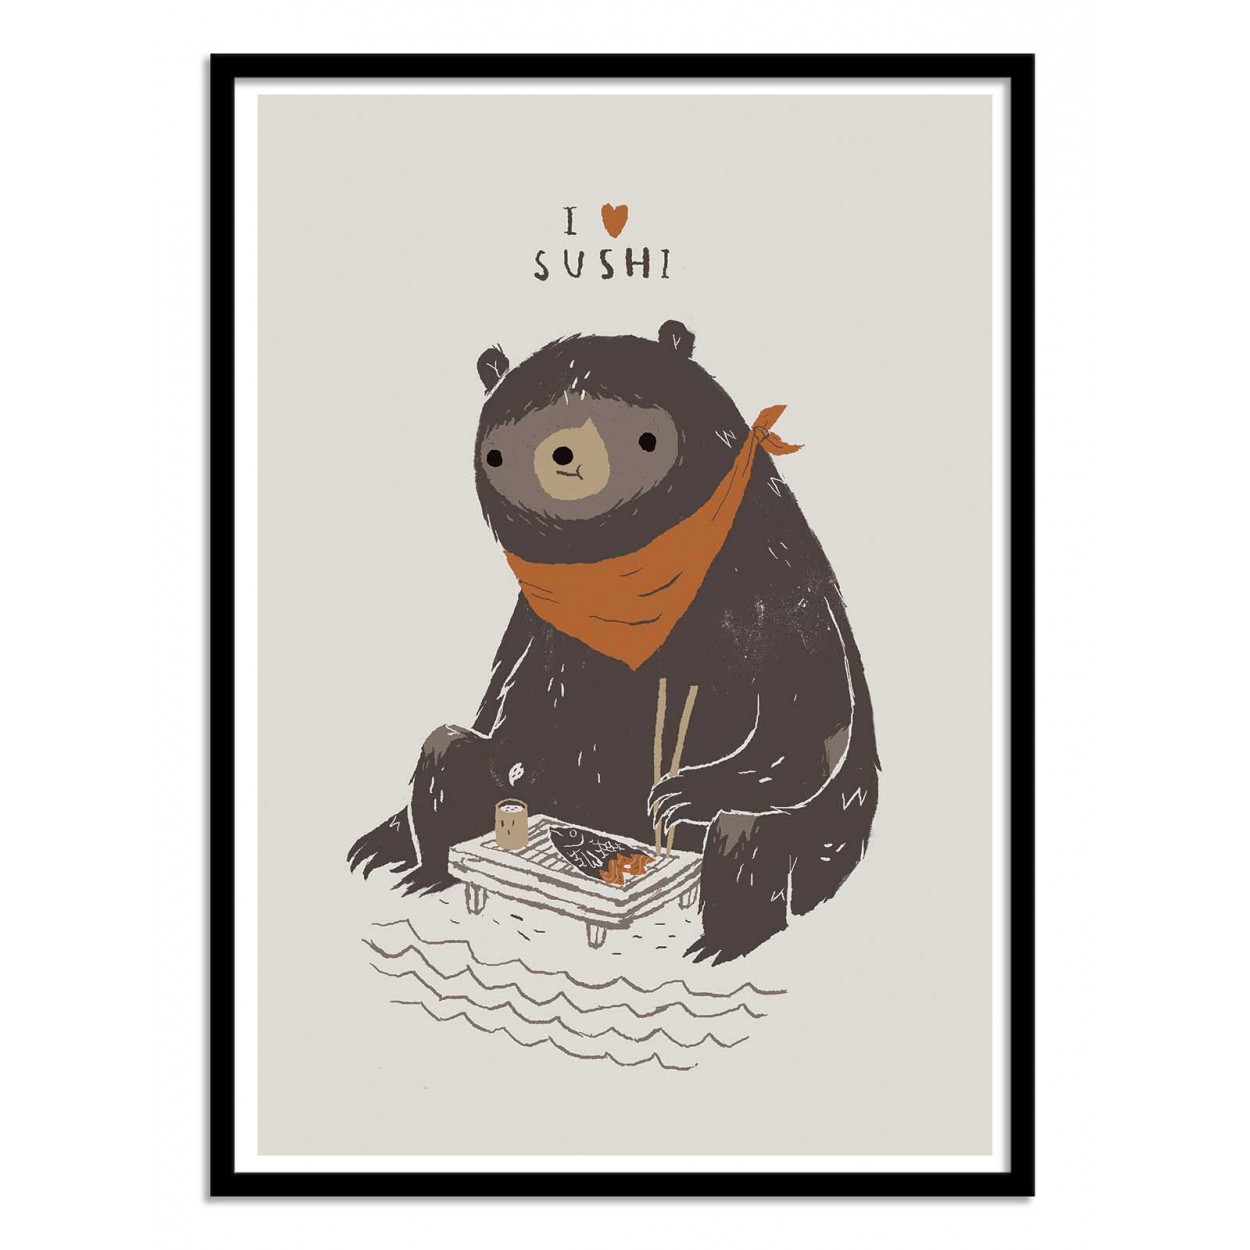 Art-Poster geek and humoristic - Sushi bear, by Louis Roskosch